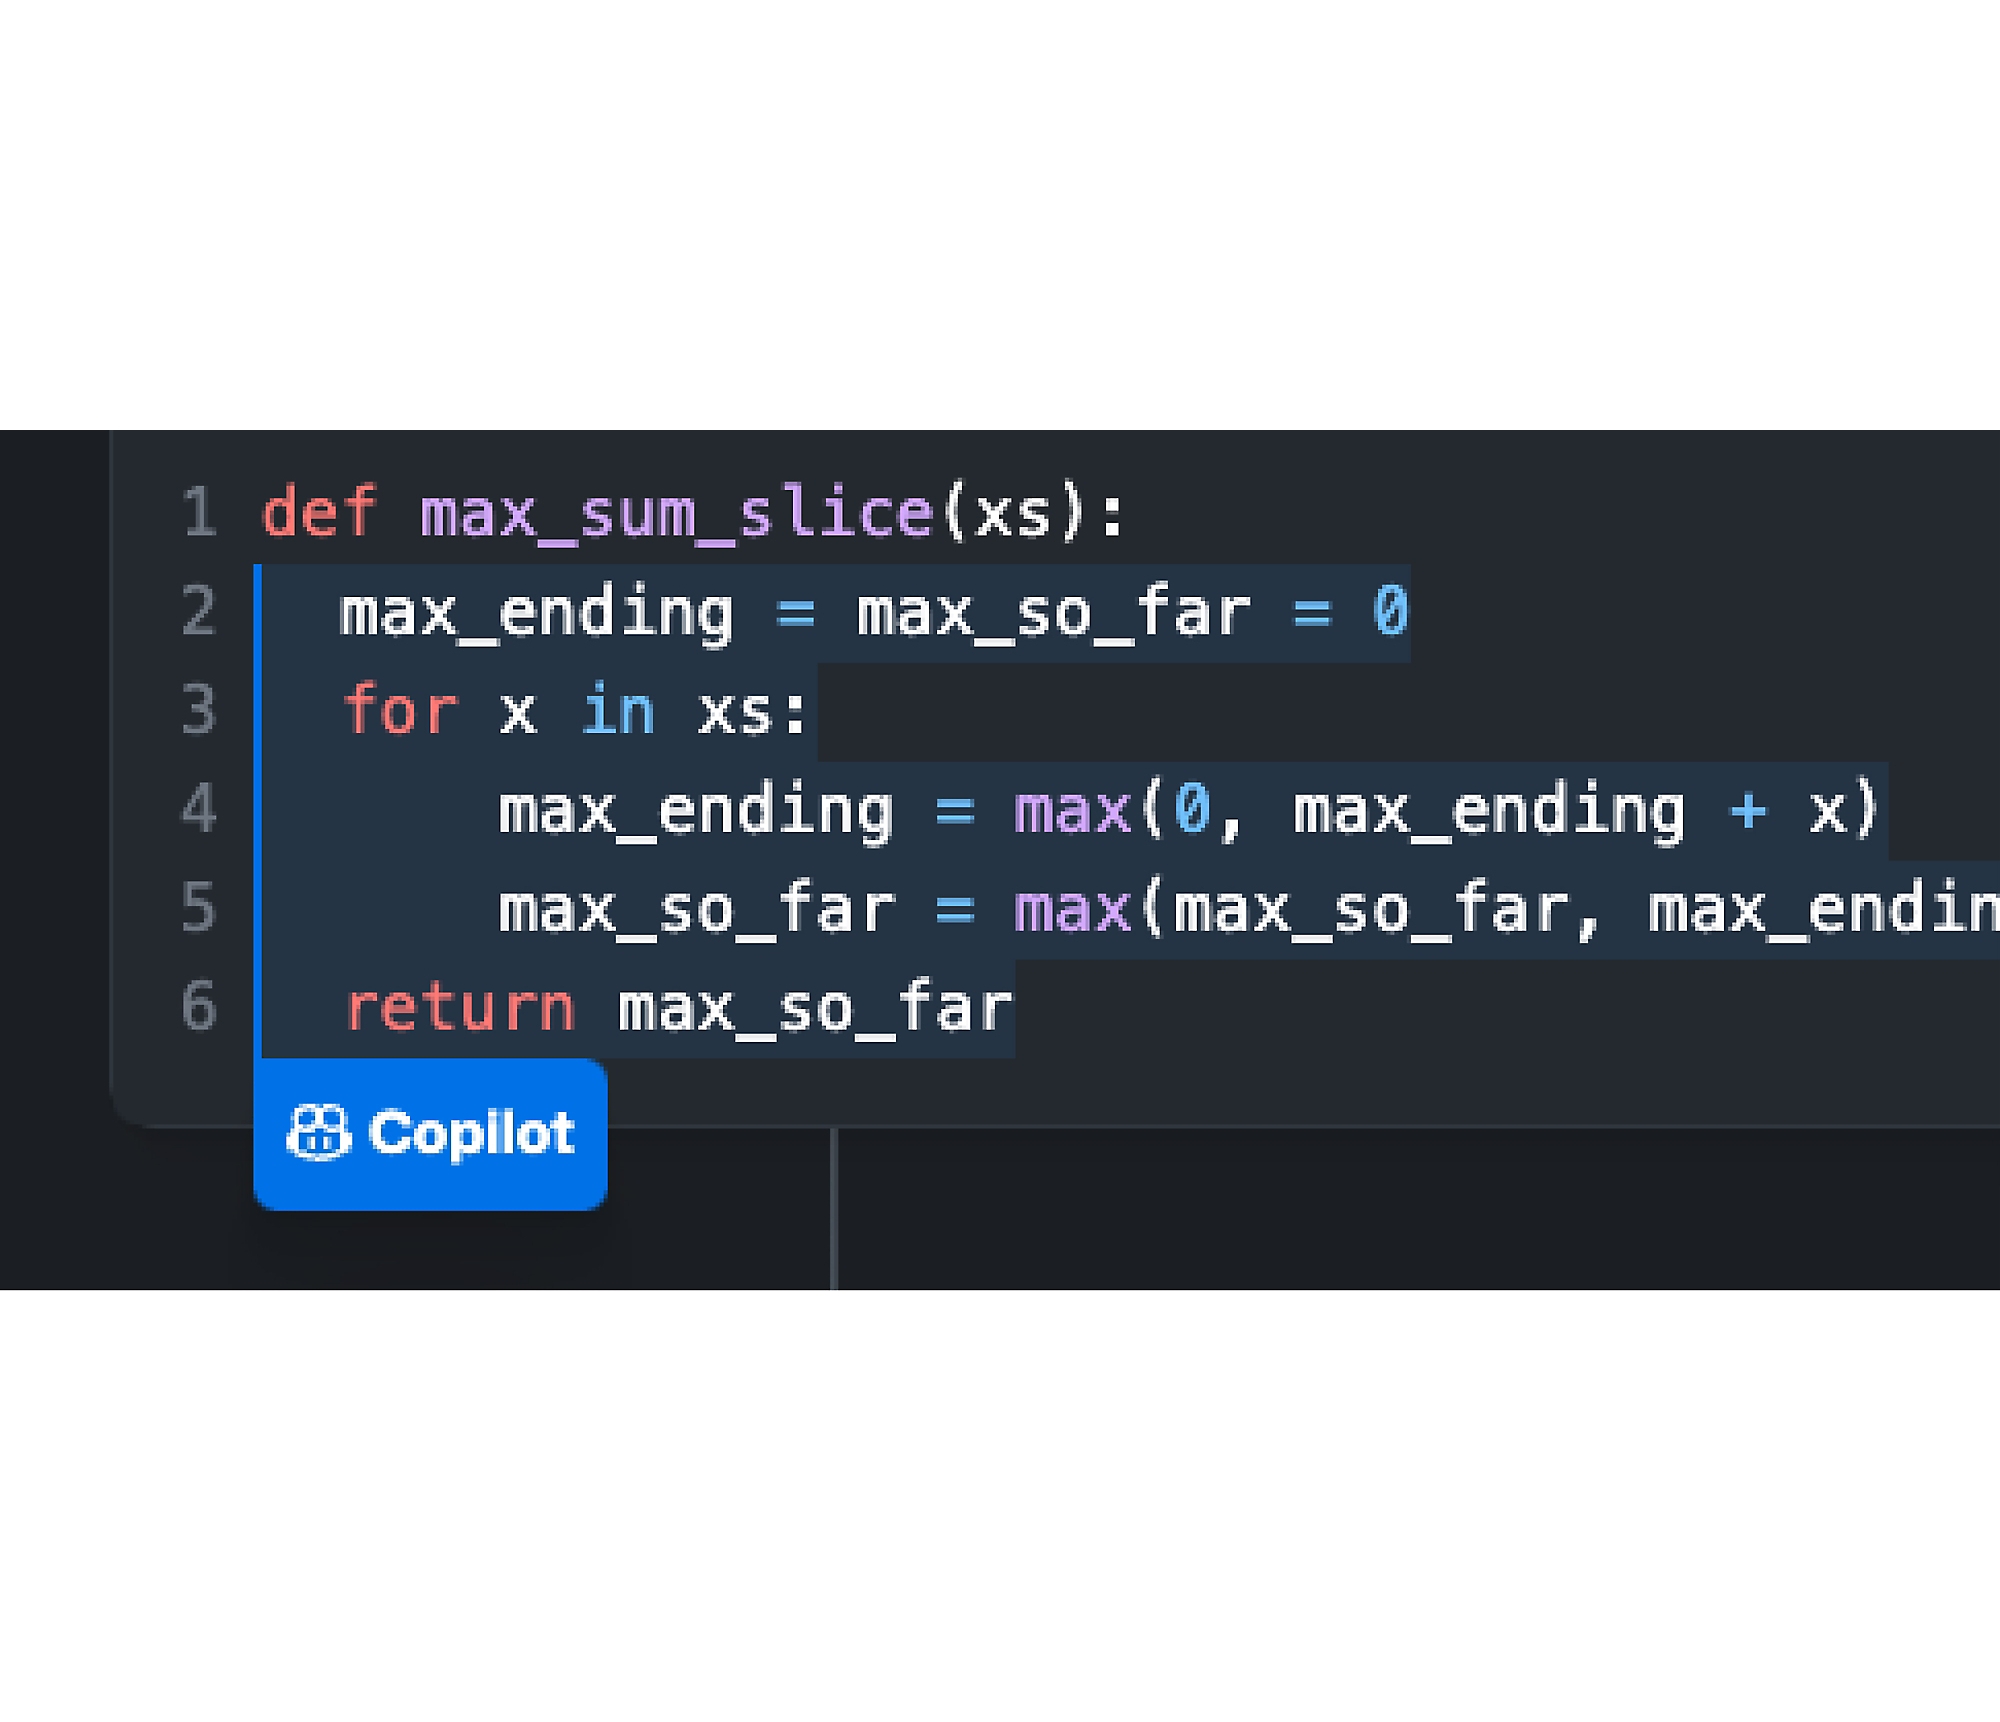 A screenshot of a block of code with a Copilot button overlaid